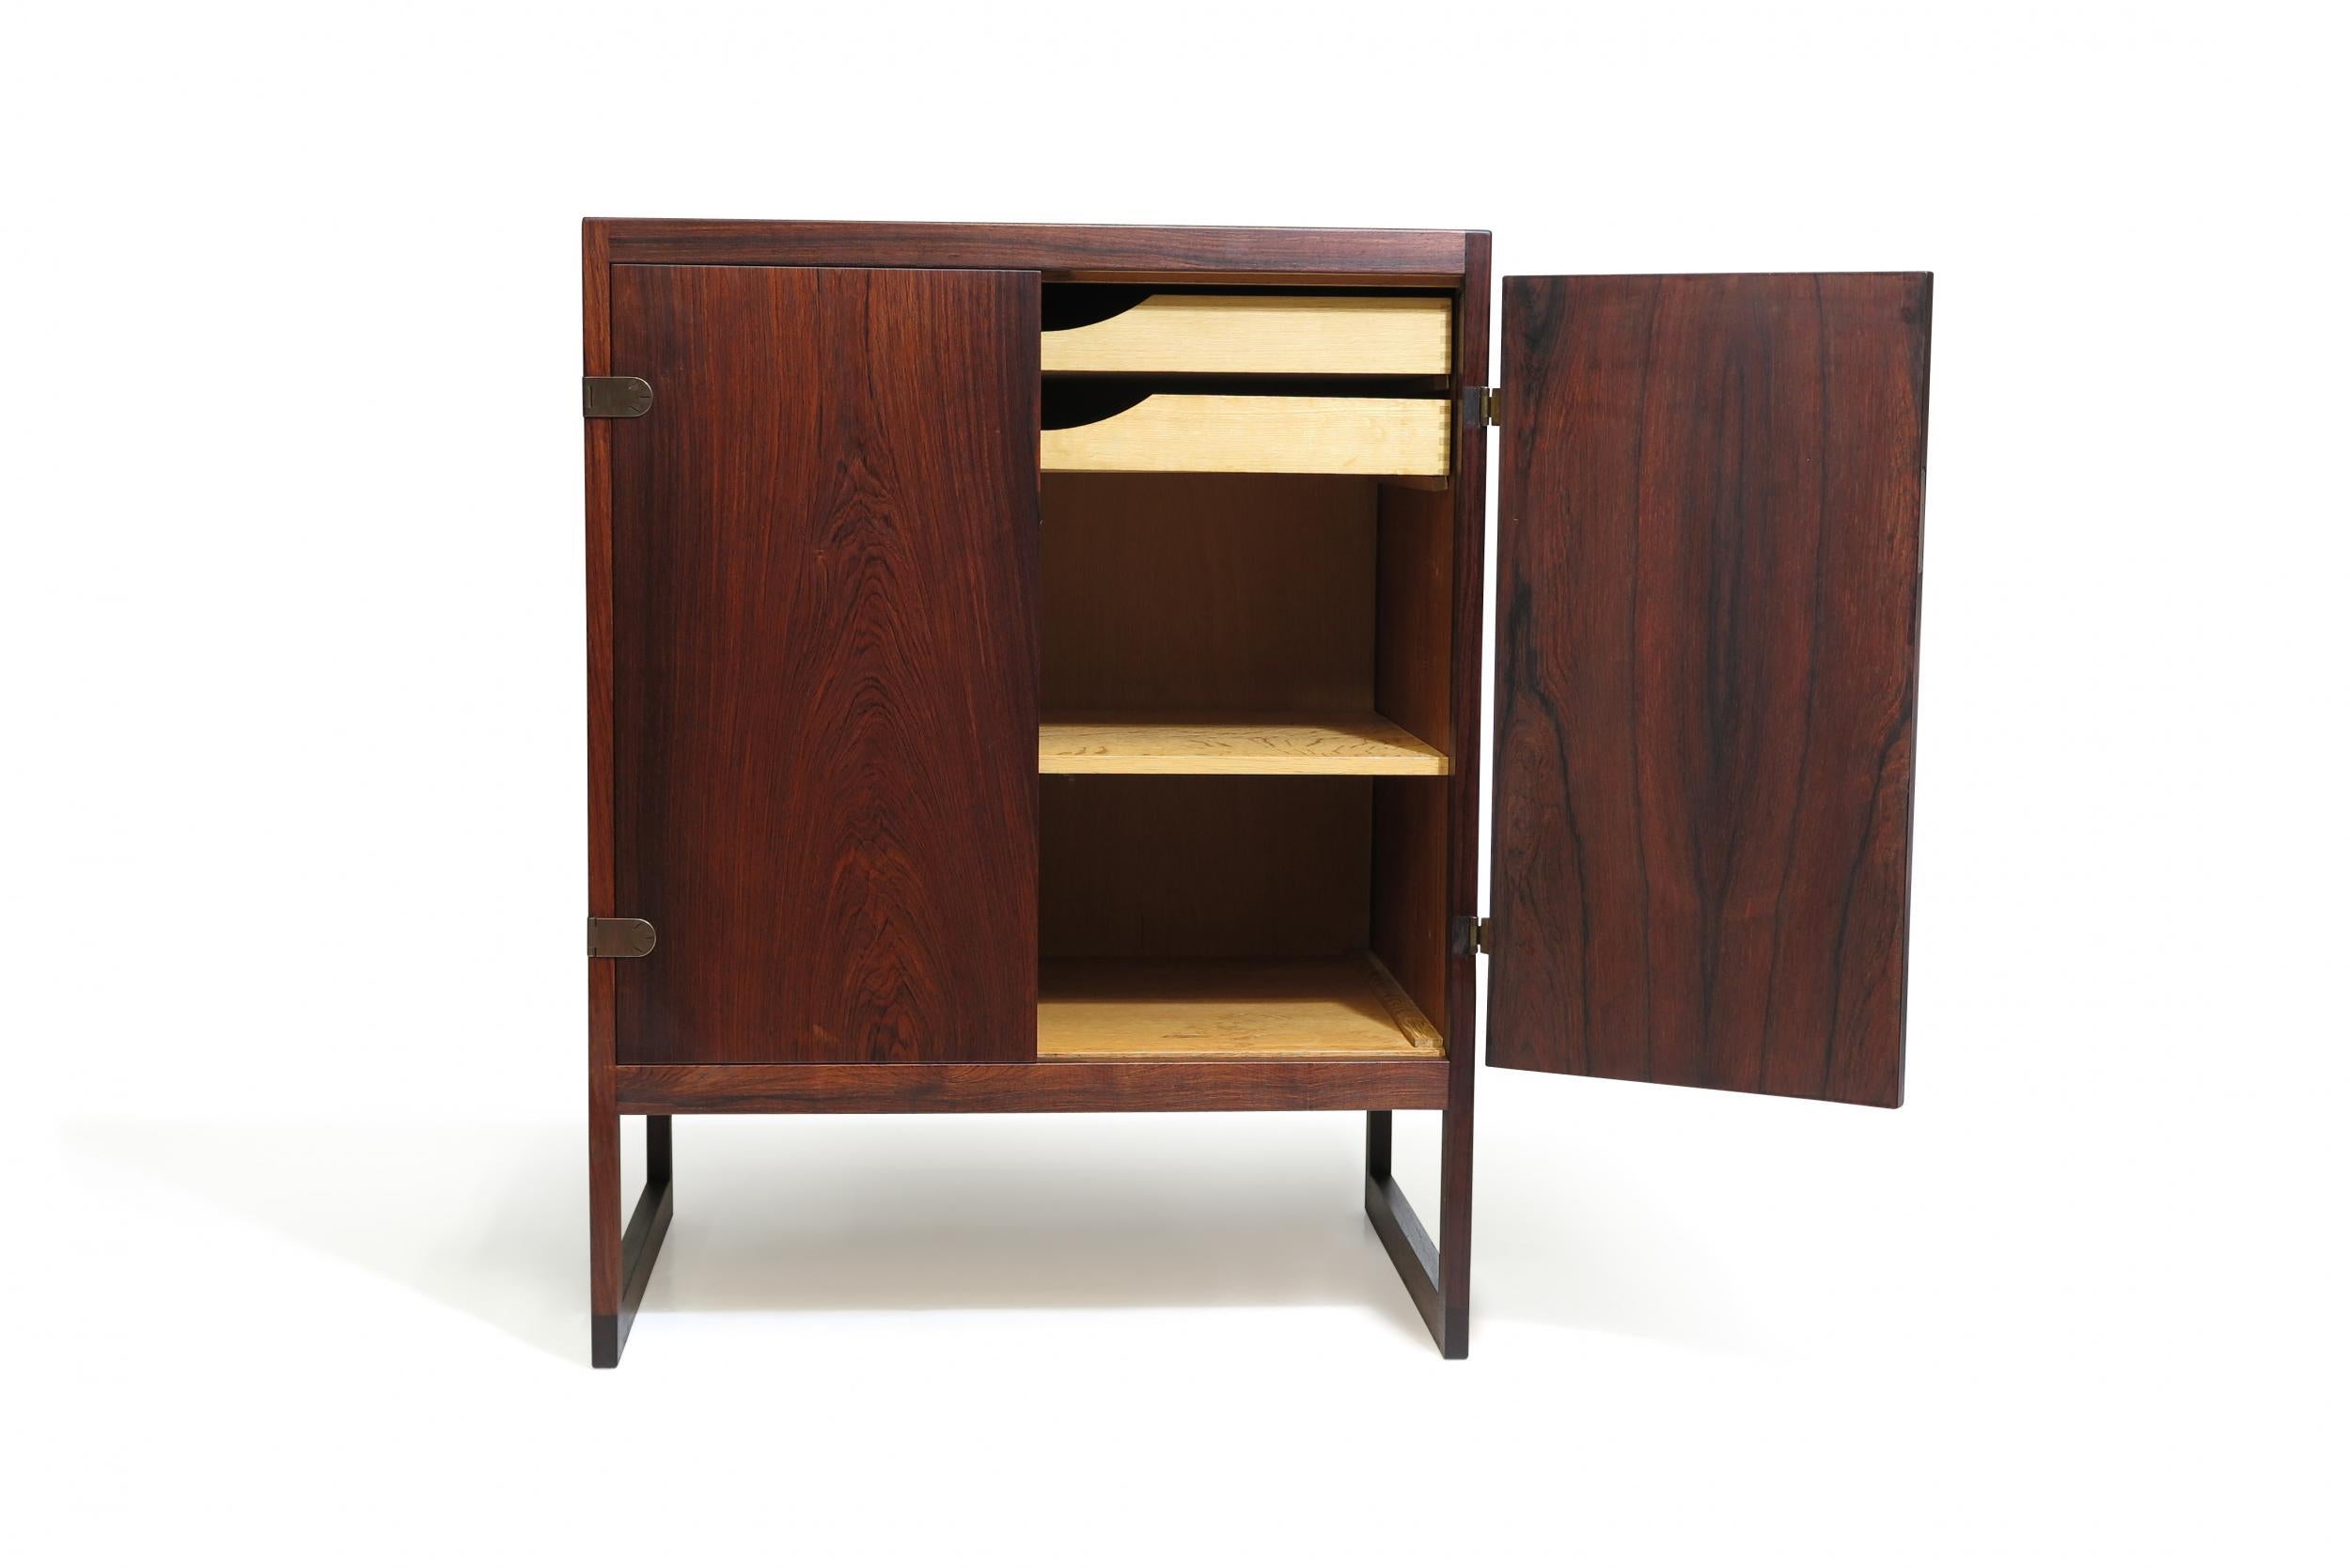 Scandinavian rosewood cabinet designed by Borge Mogensen for P. Lauritsen & Son Denmark, Model BM 57. Cabinet crafted of rosewood with two doors with brass hinges and key. Interior of white oak with series of small drawers and adjustable shelves.